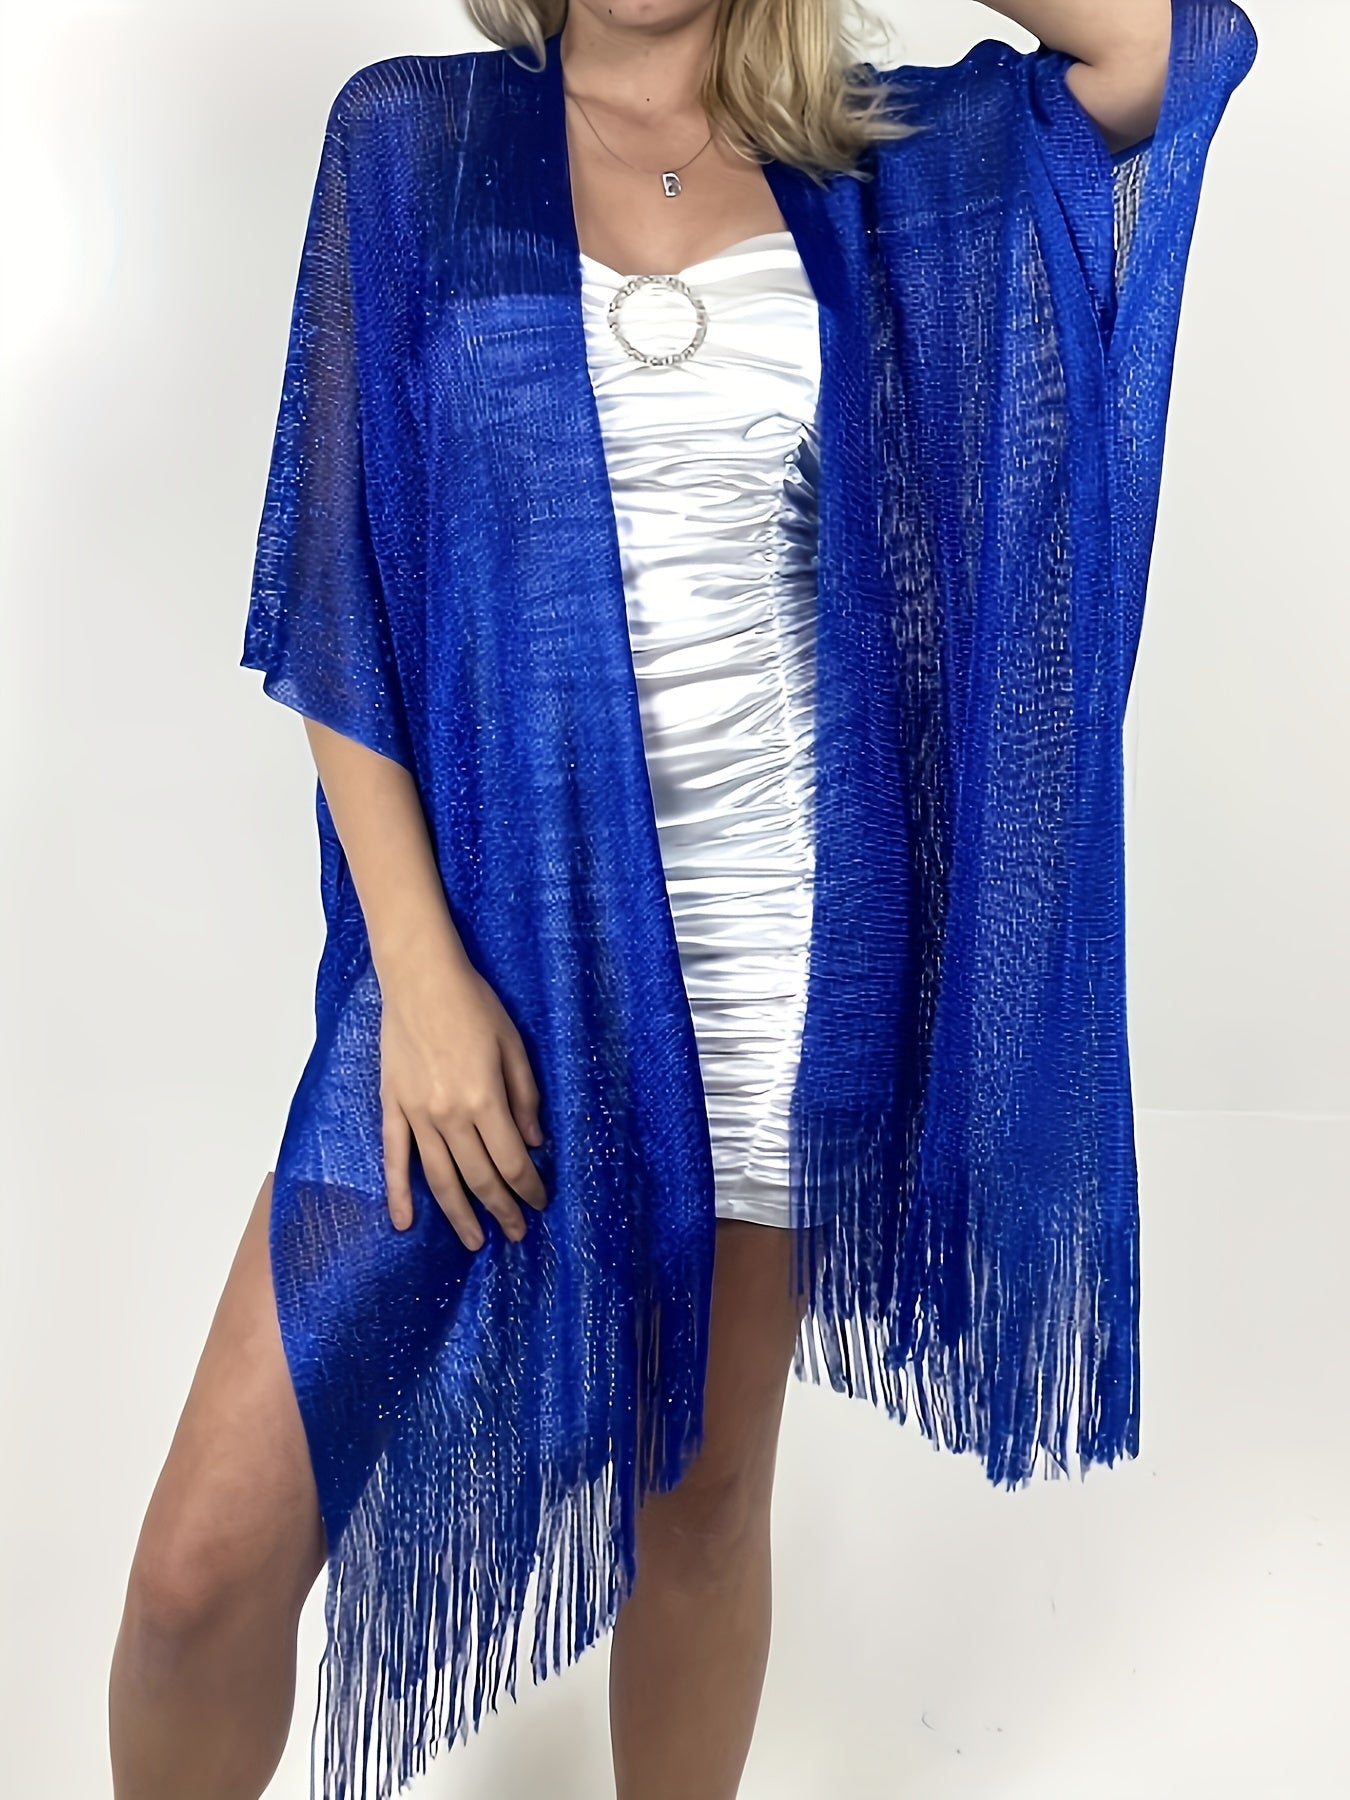 Woman wearing a vibrant blue, fringed shawl over an elegant polyester dress with a ruched design, from Maramalive™'s Plus Size Split Tassel Top, Casual Open Front Top For Summer, Women's Plus Size Clothing collection.